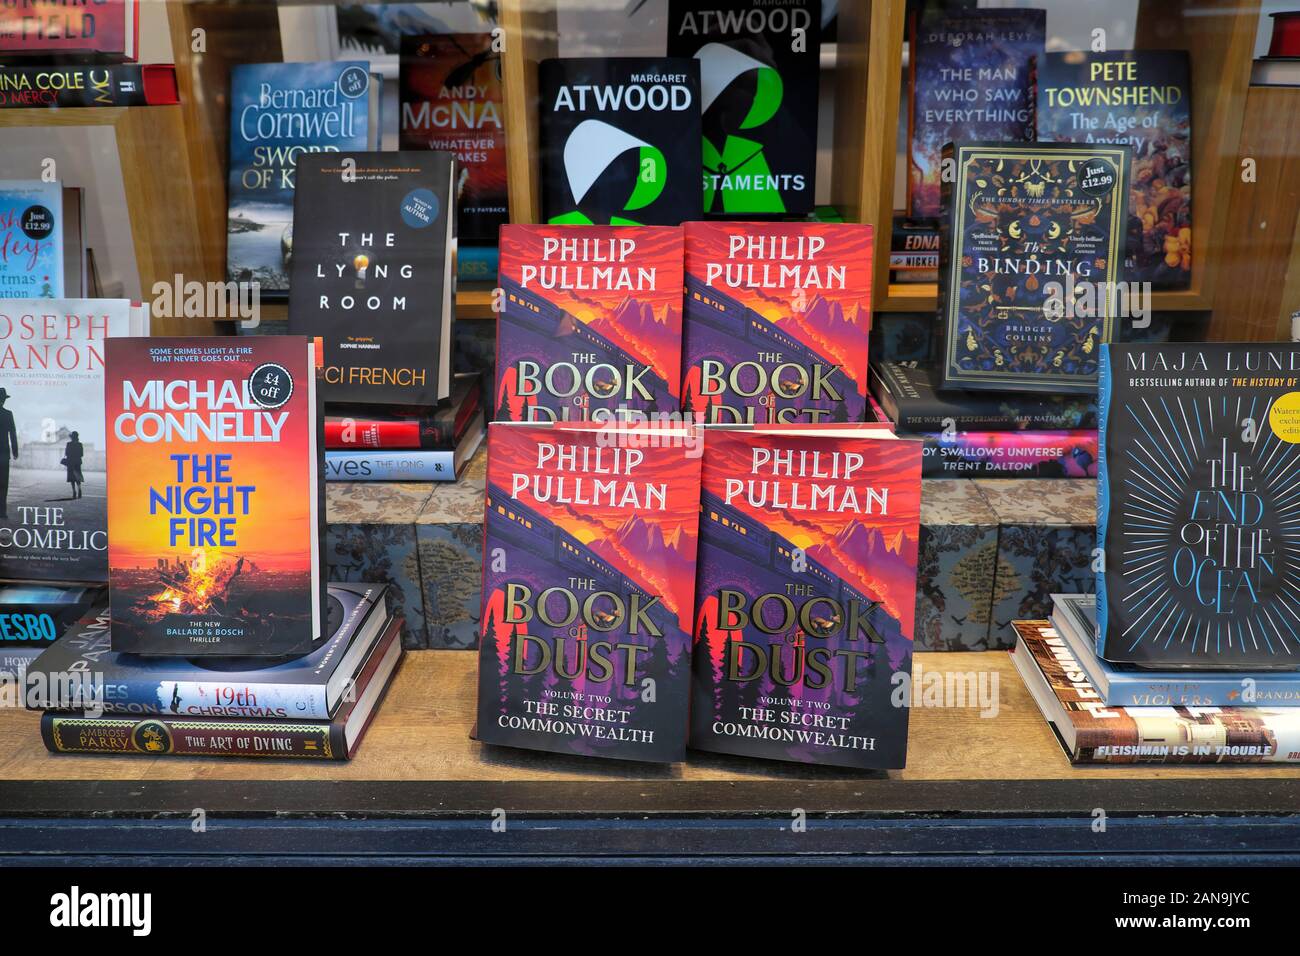 Philip Pullman The Book of Dust book front covers in Waterstones bookstore window display with other books in 2019 London England UK  KATHY DEWITT Stock Photo